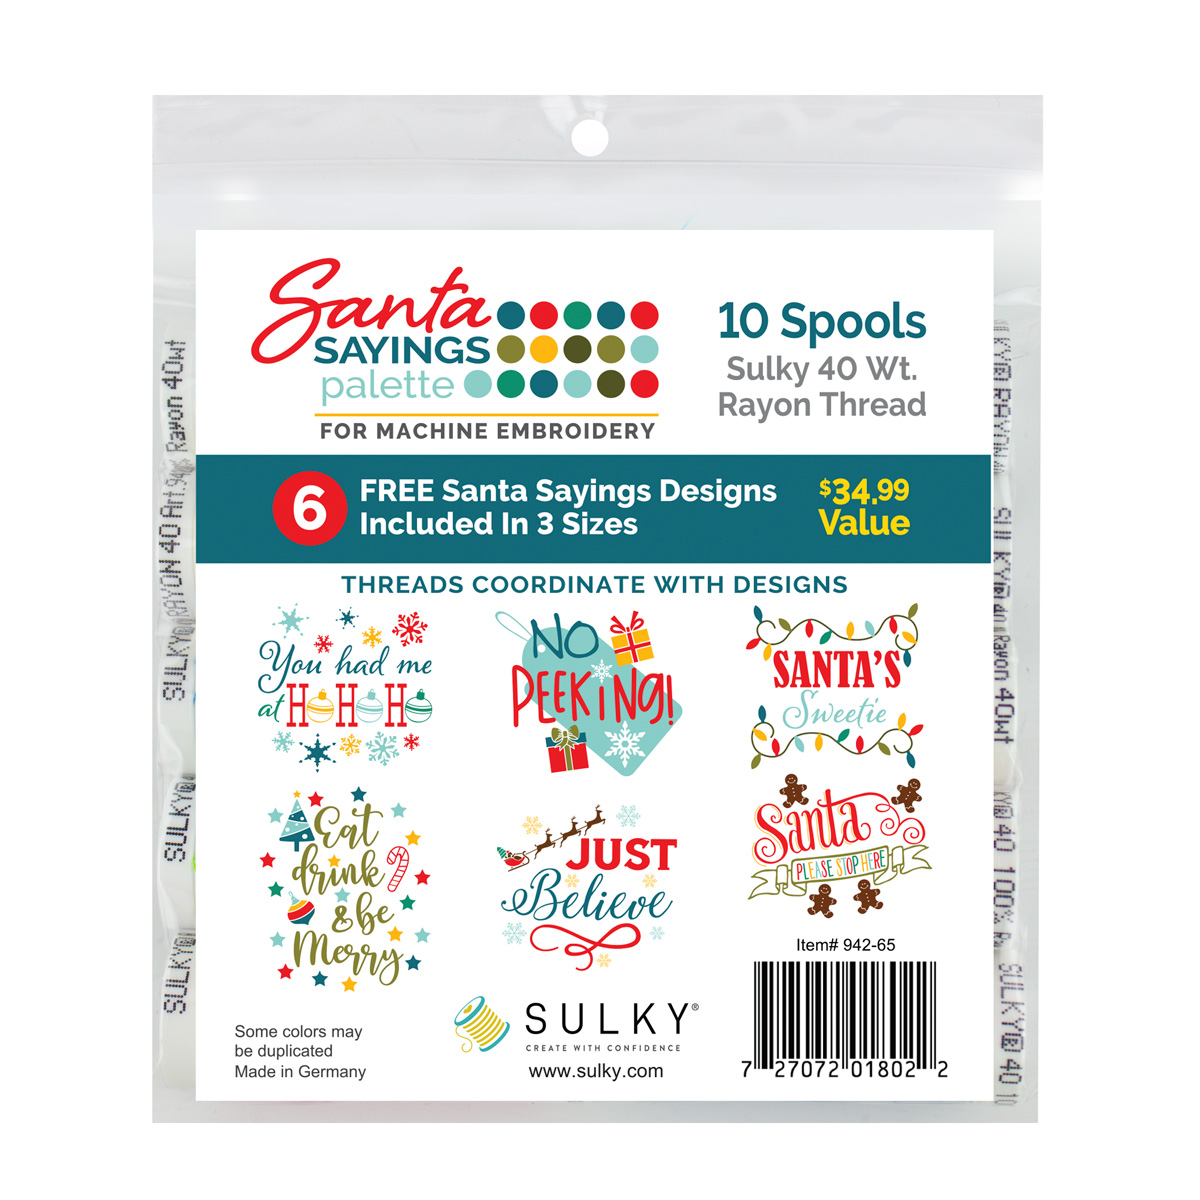 Santa Sayings Machine Embroidery Palette - 40 wt. Rayon Thread -10-pack + 6 Designs Questions & Answers